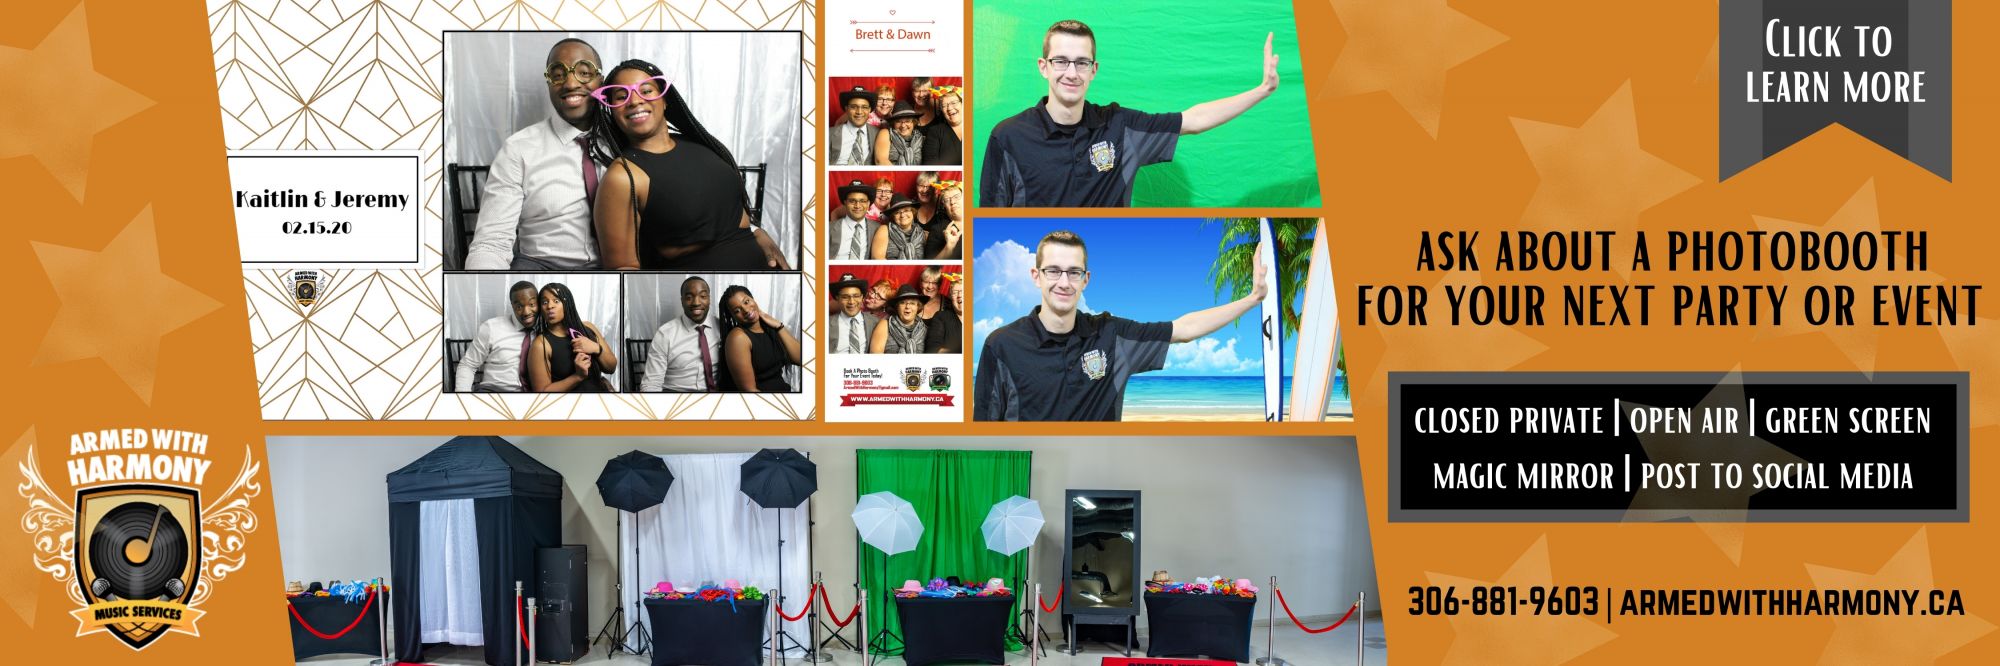 Armed With Harmony  | Saskatoon Wedding DJs, Photo Booths, Outdoor Movies & Event Production